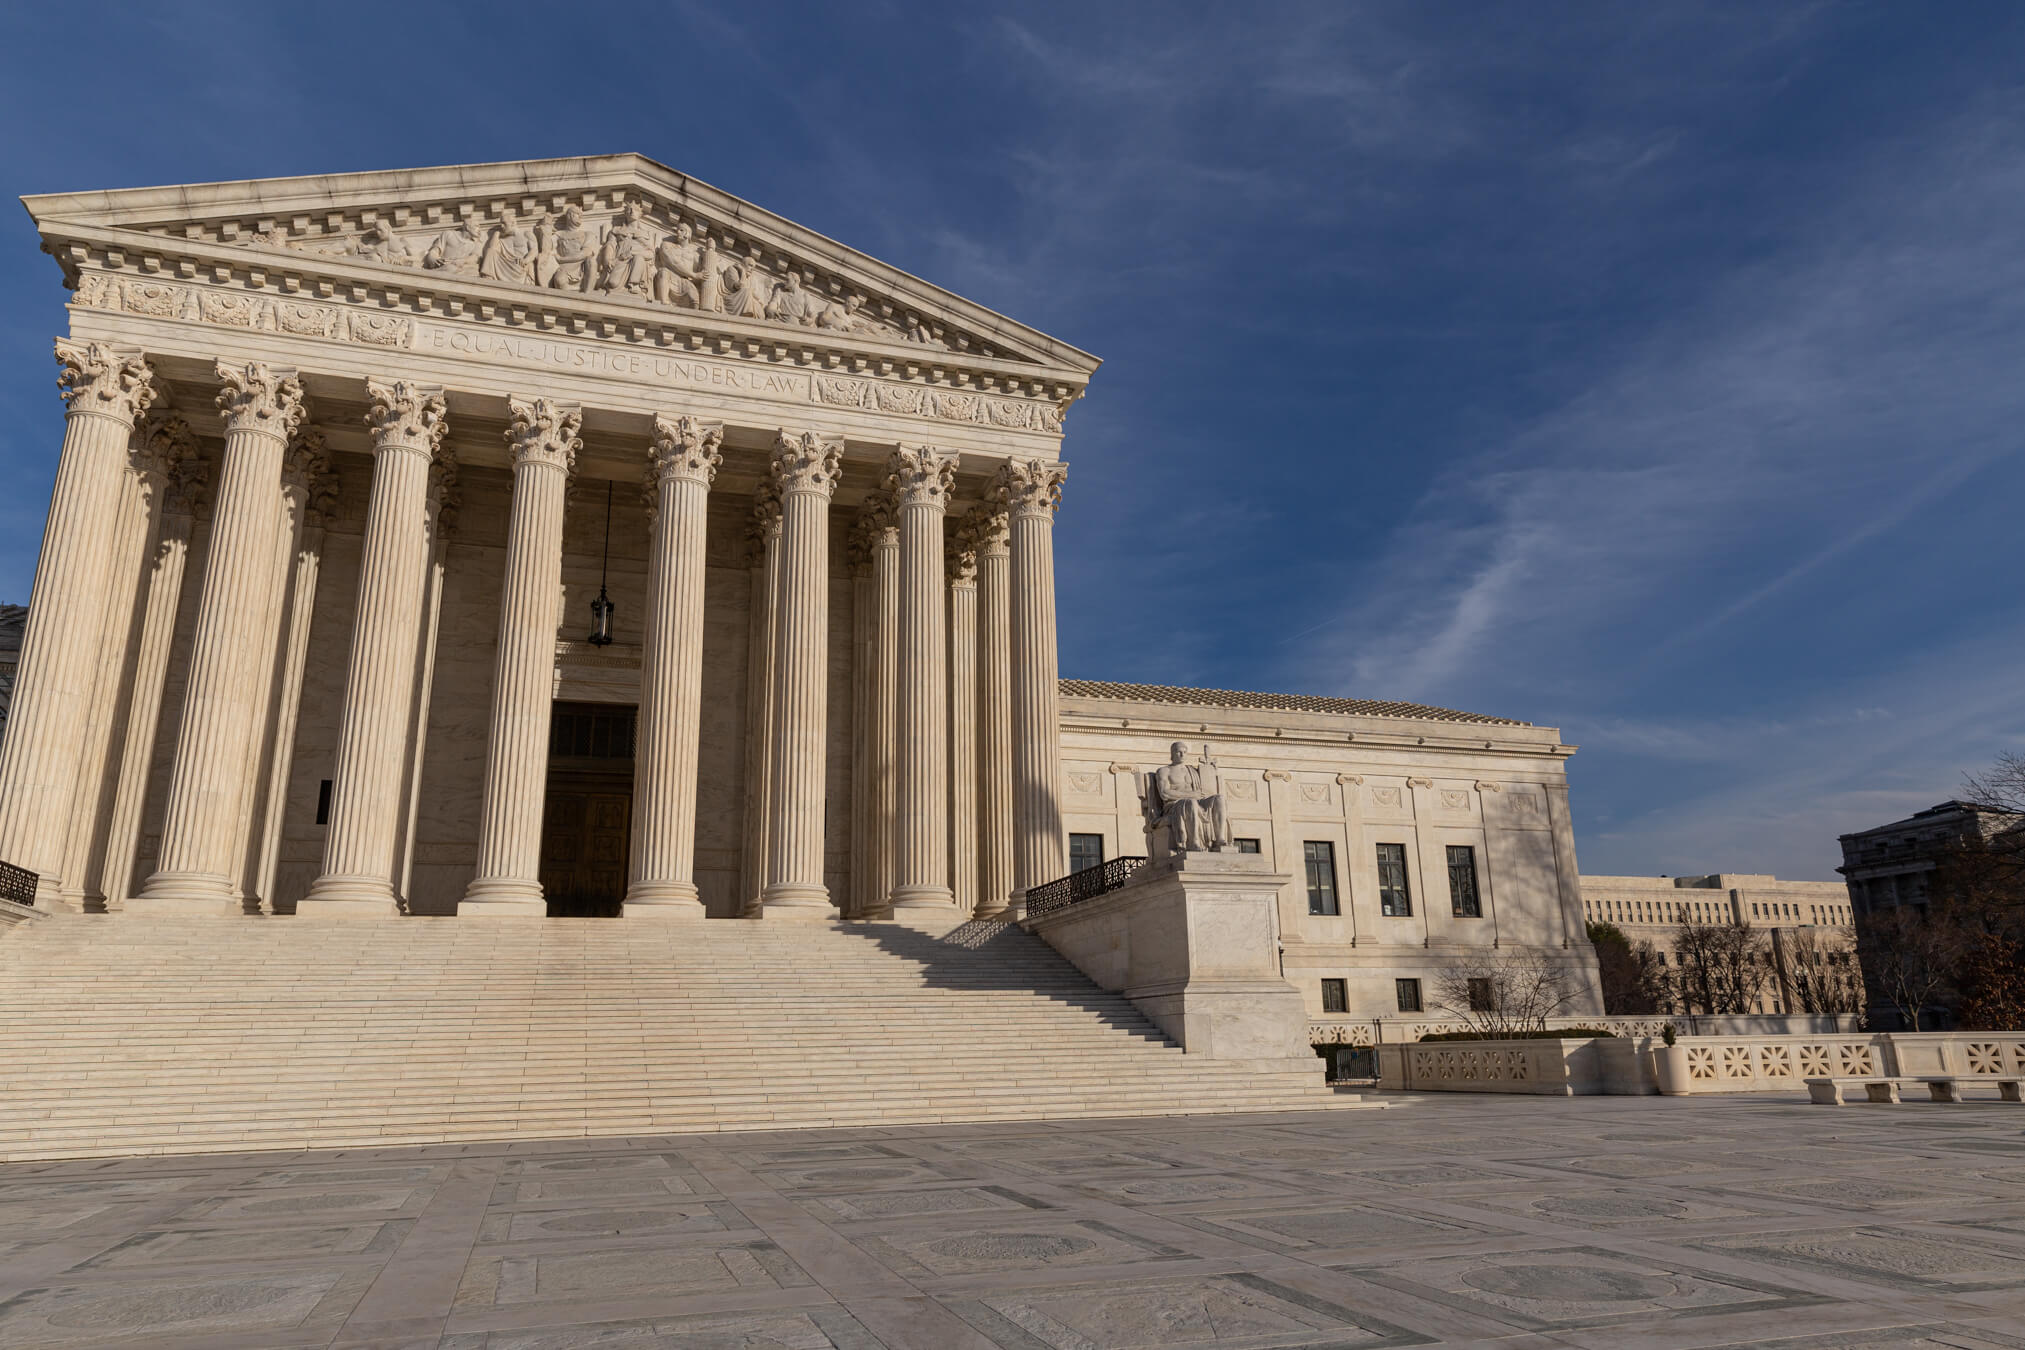 The United States Supreme Court building in Washington, D.C. 